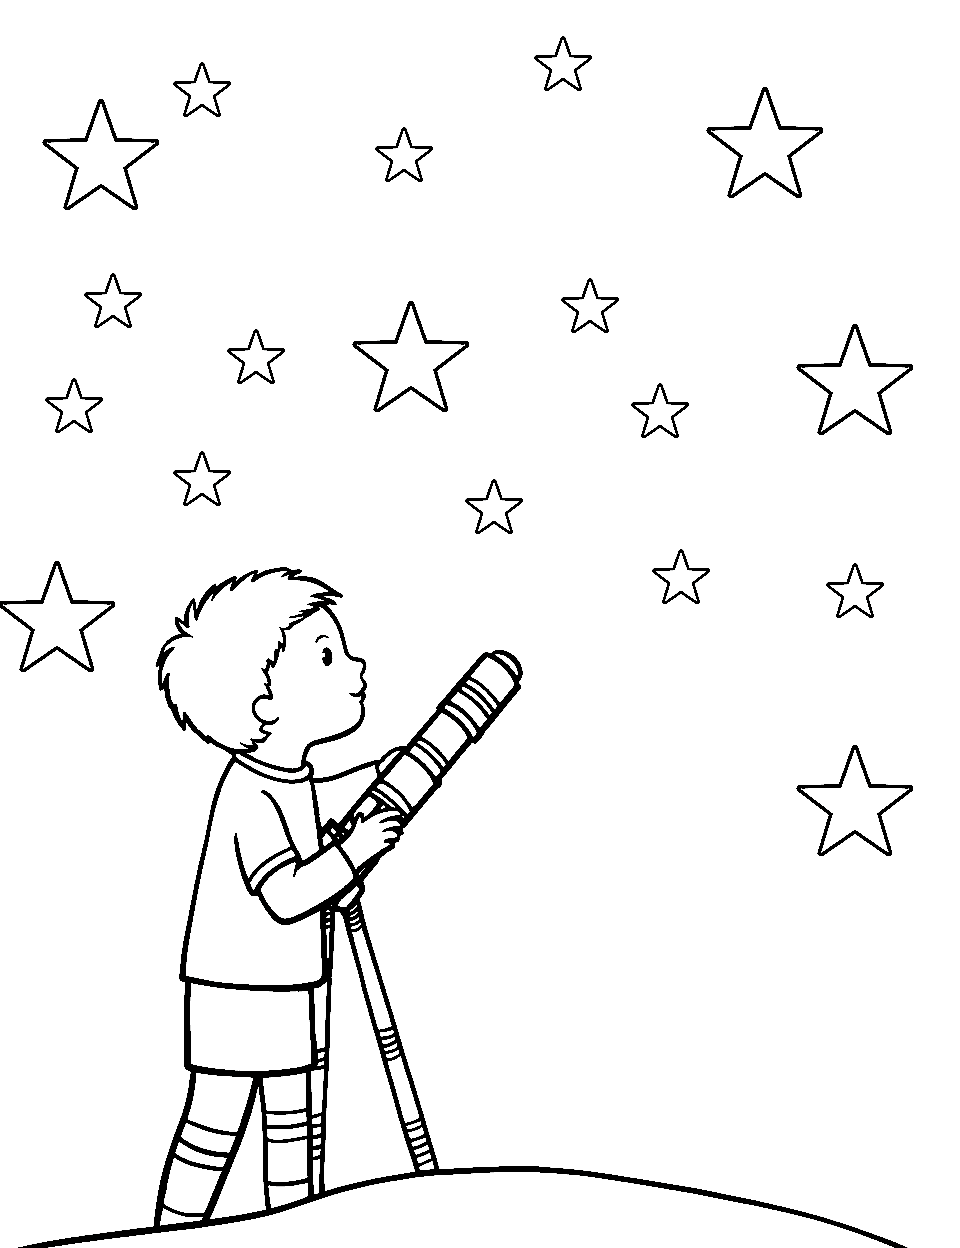 Toddler's Telescope Time Coloring Page - A toddler gazing up at the sky through a colorful telescope.